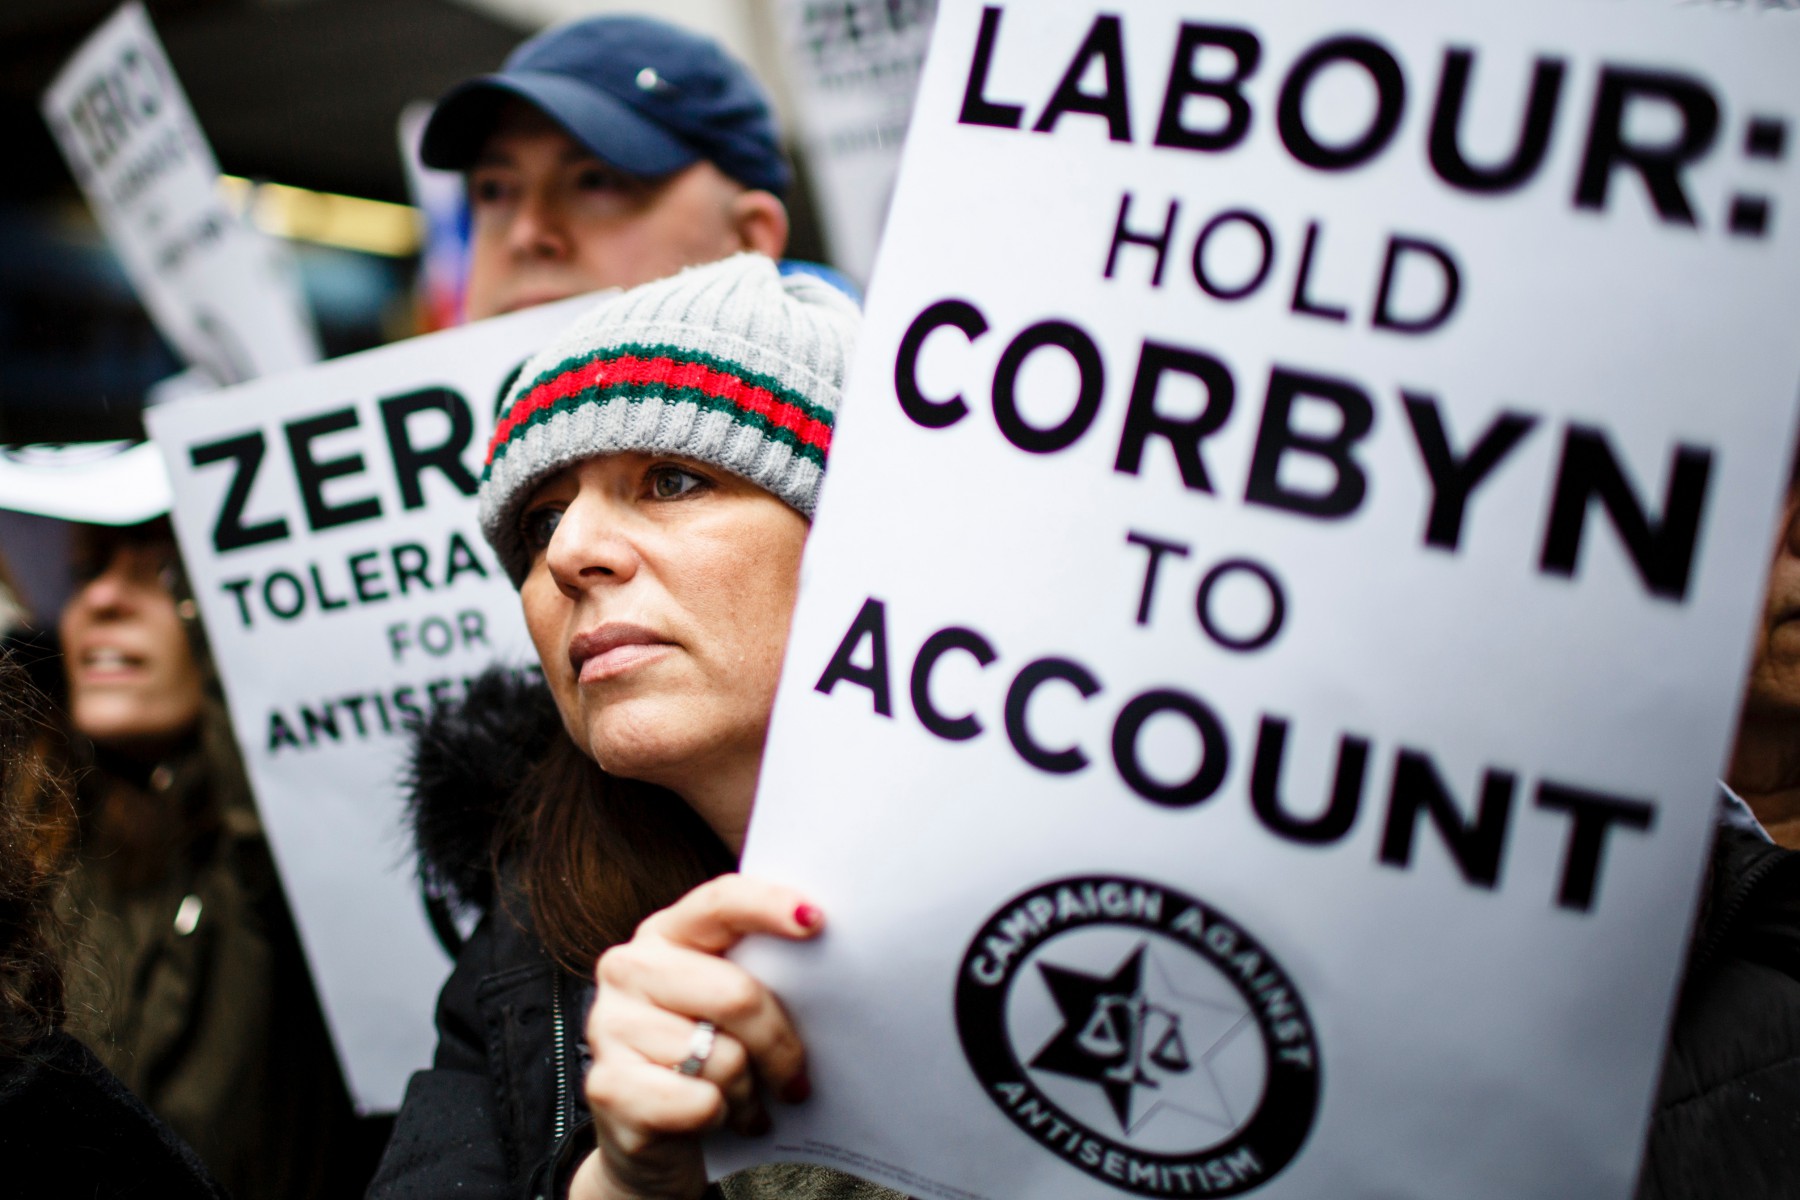 The vast majority of British Jews fear the prospect of a Corbyn government